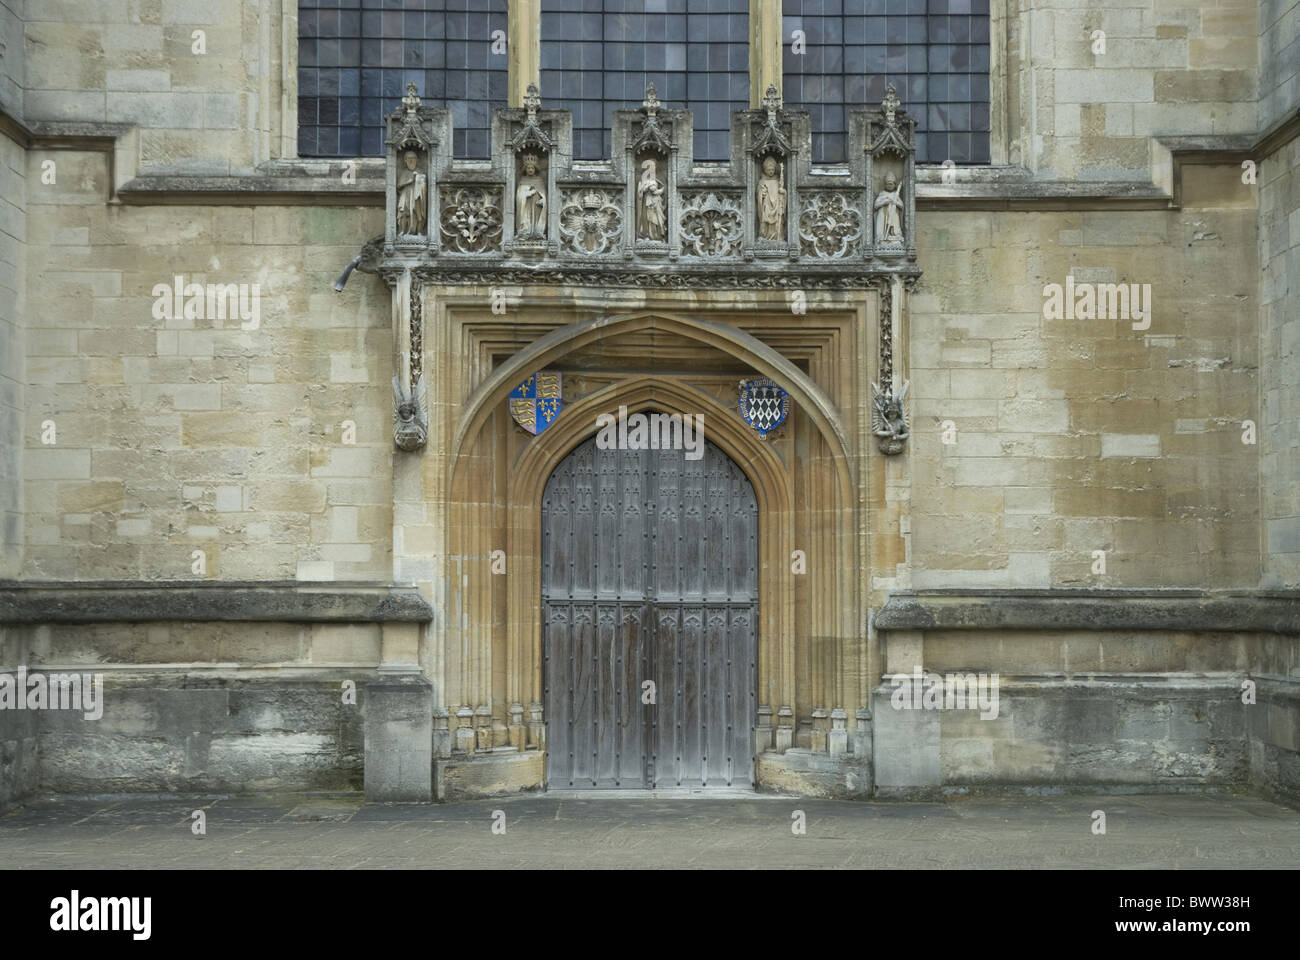 Doorway Coat of arms Statue Magdalen College Oxford University UK britain british english england country scenic scenics Stock Photo